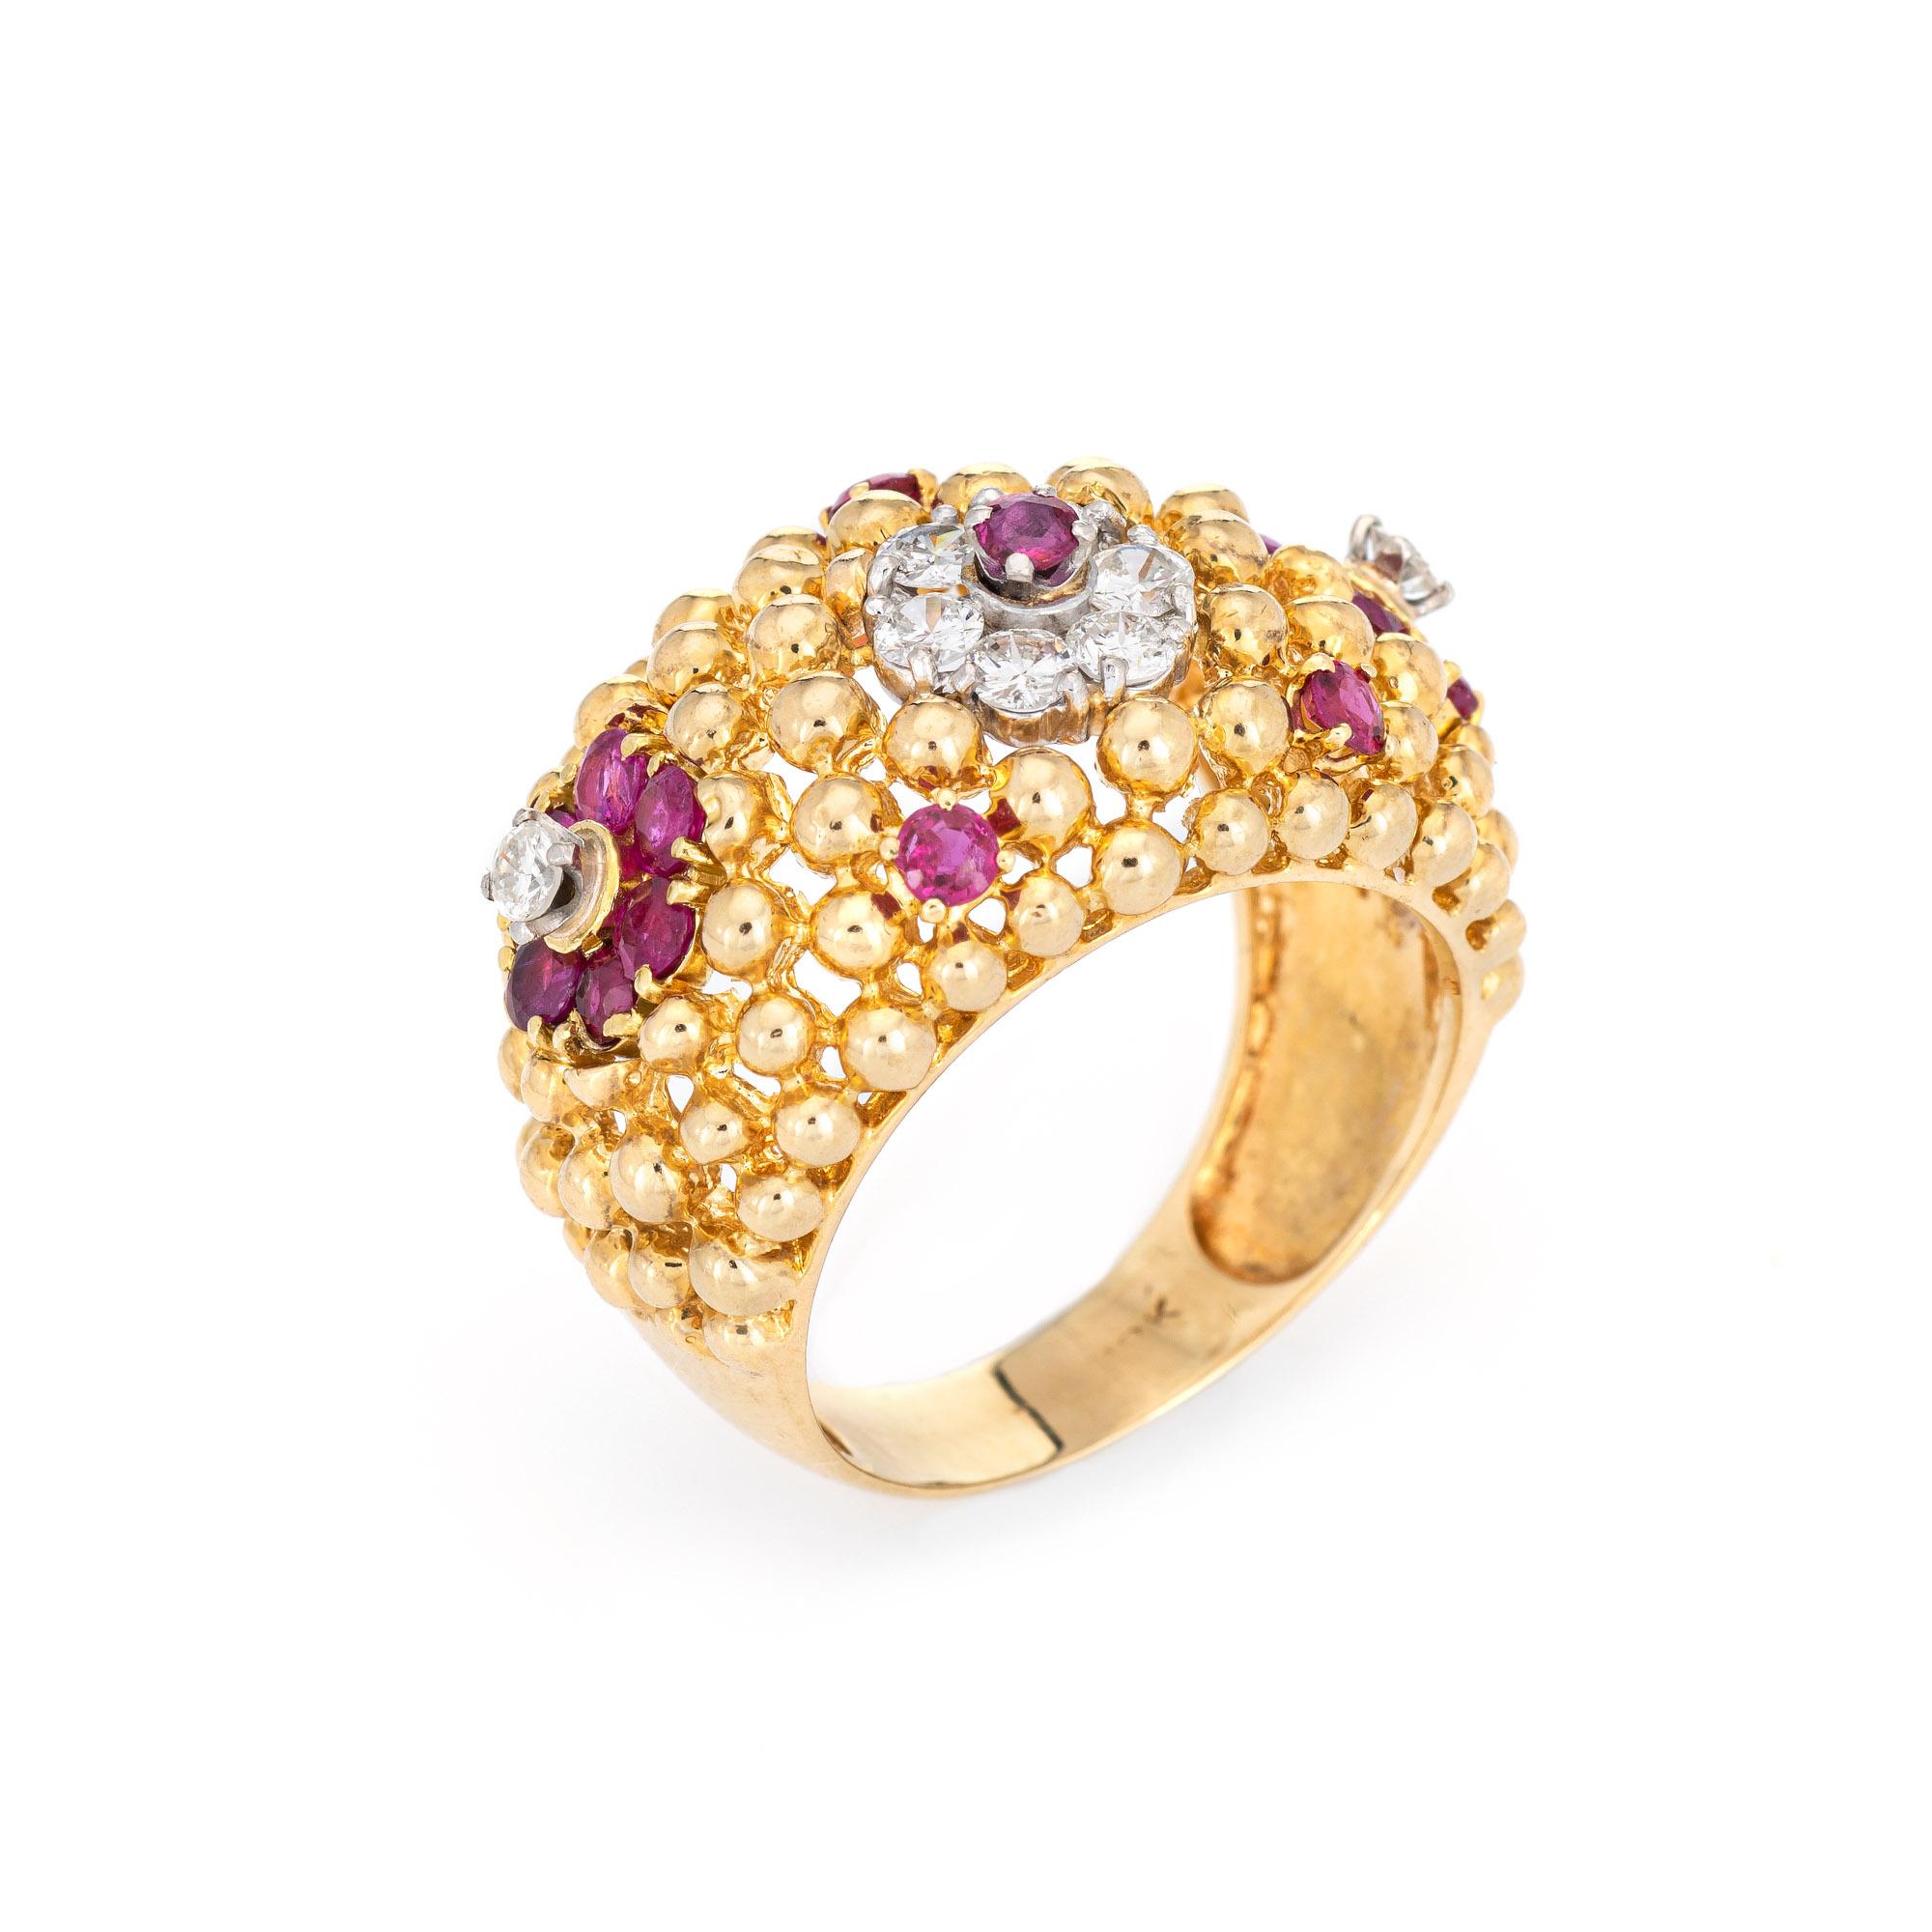 Stylish vintage ruby & diamond domed flower ring (circa 1960s to 1970s) crafted in 18 karat yellow gold. 

Round brilliant cut diamonds total an estimated 0.70 carats (estimated at G-H color and VS2-I1 clarity. Rubies total an estimated 0.90 carats.